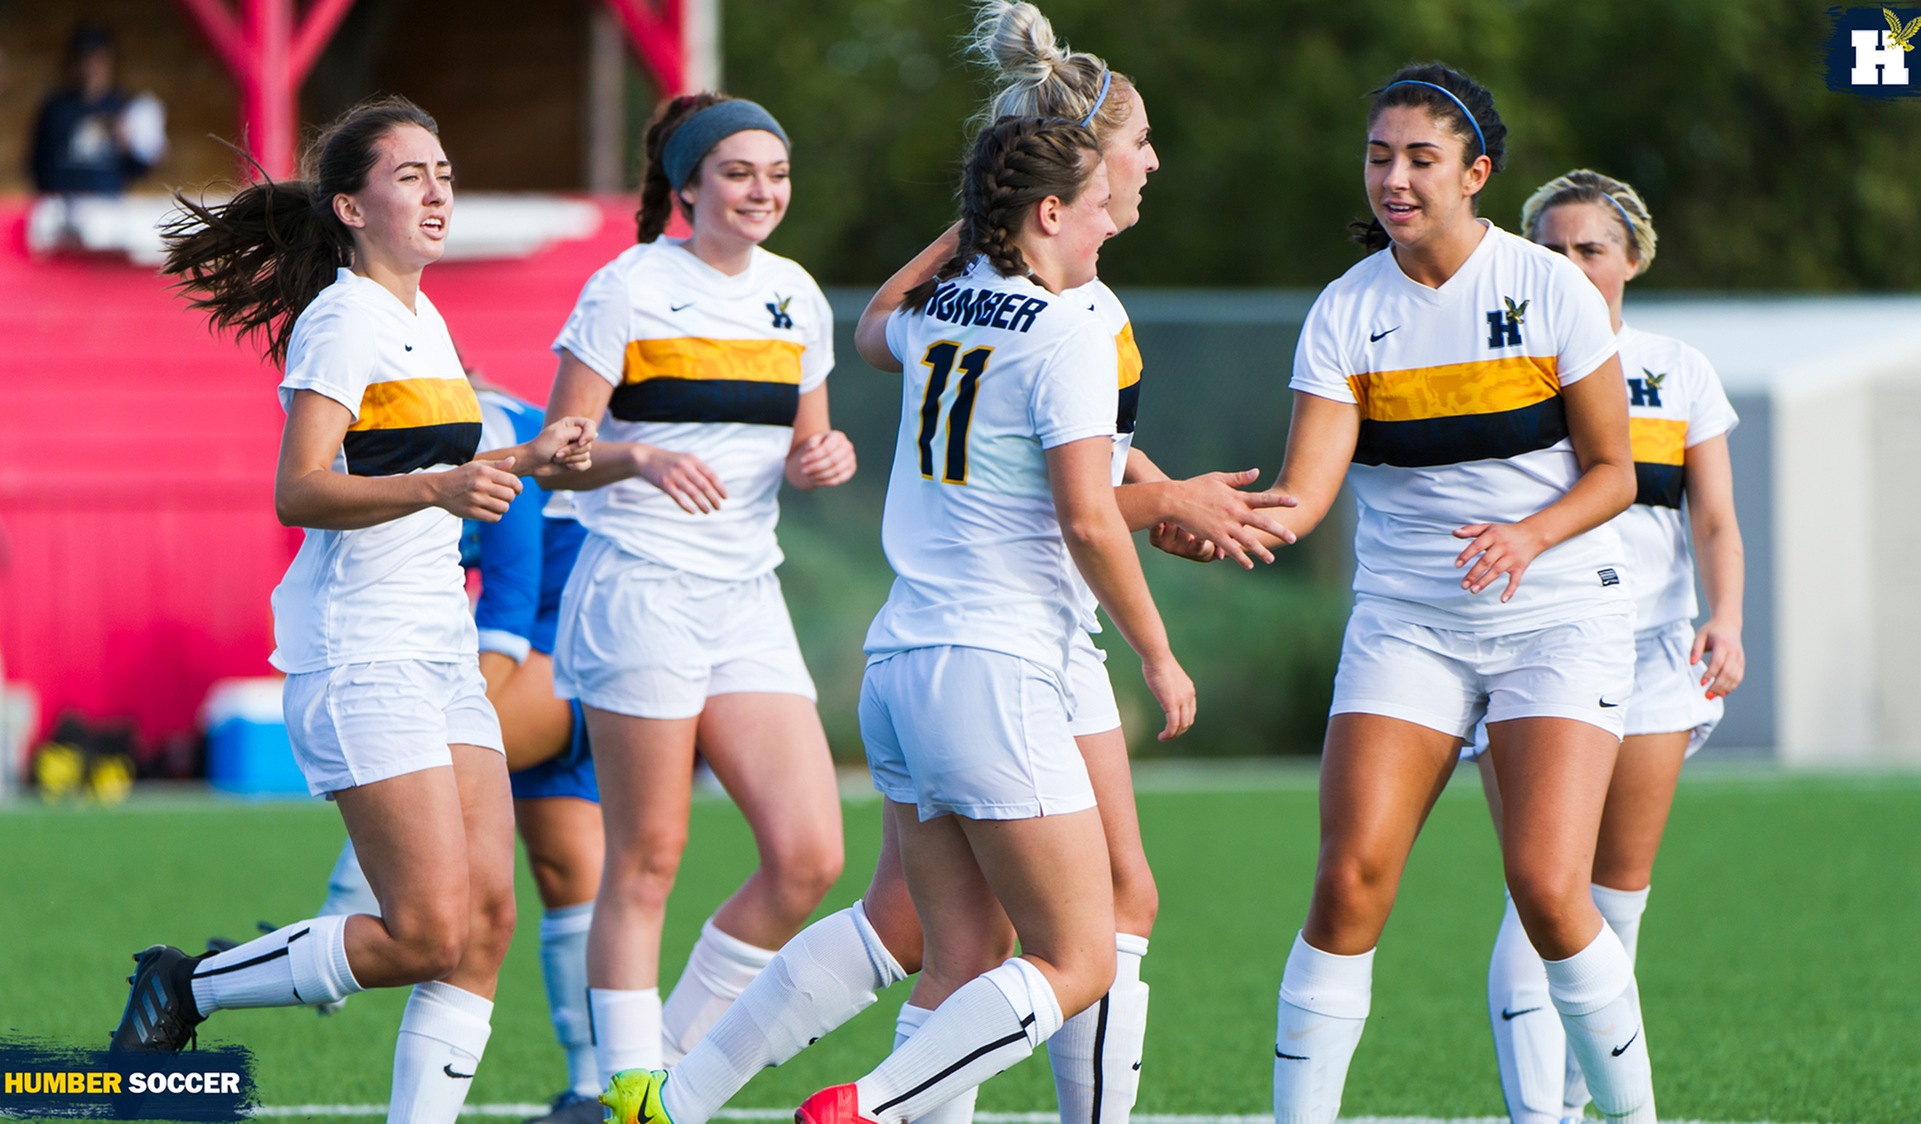 No. 4 WOMEN'S SOCCER SET TO FACE GEORGE BROWN FRIDAY